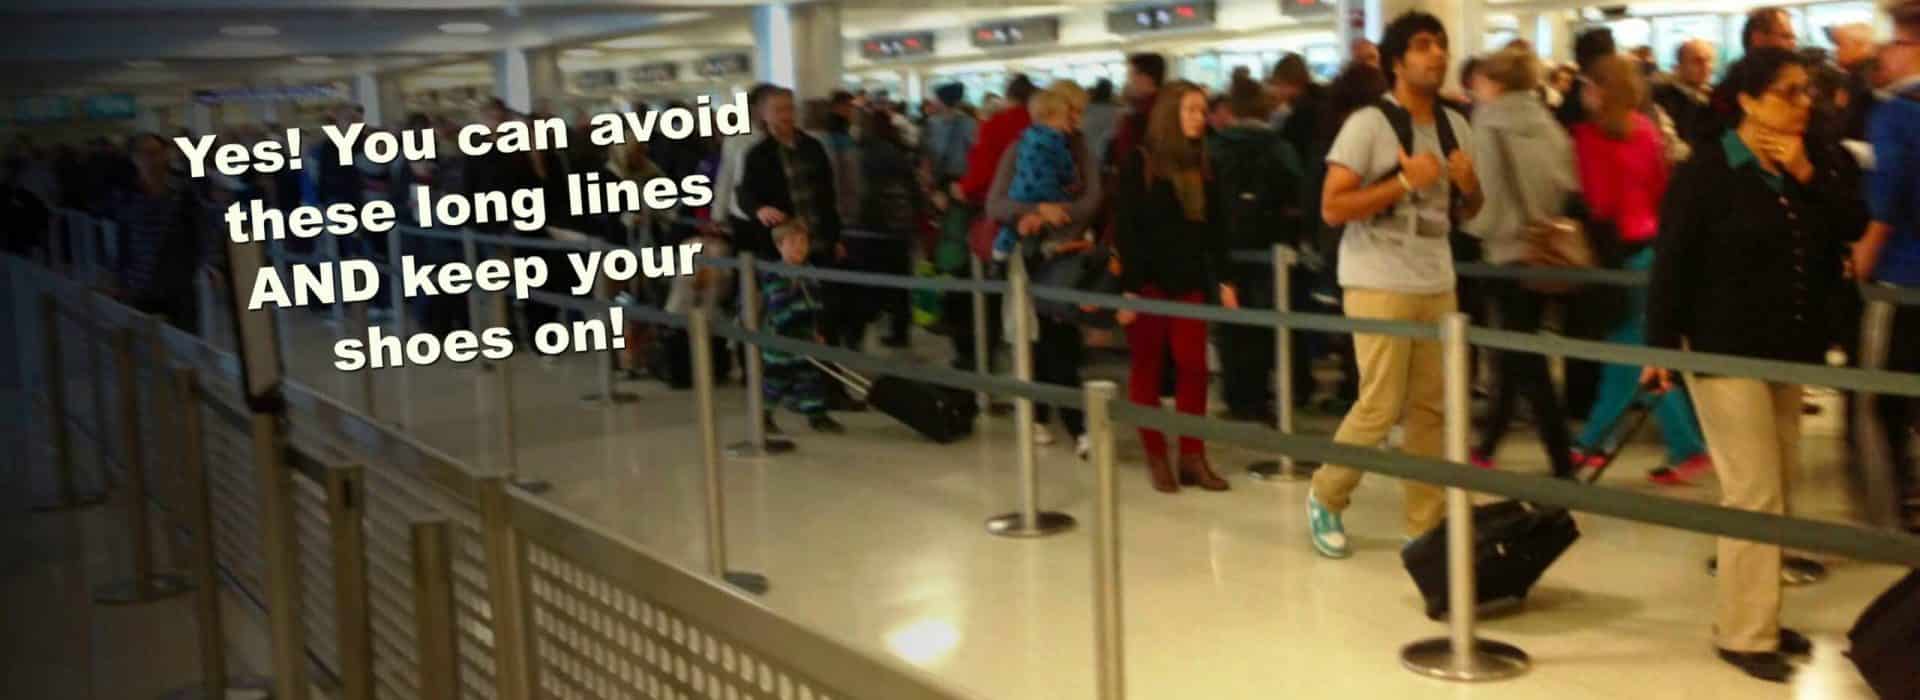 people standing in line at an airport|How and why you should get Global Entry|How do I get Global Entry|How to get Global Entry||how to get Global Entry|how to get global entry